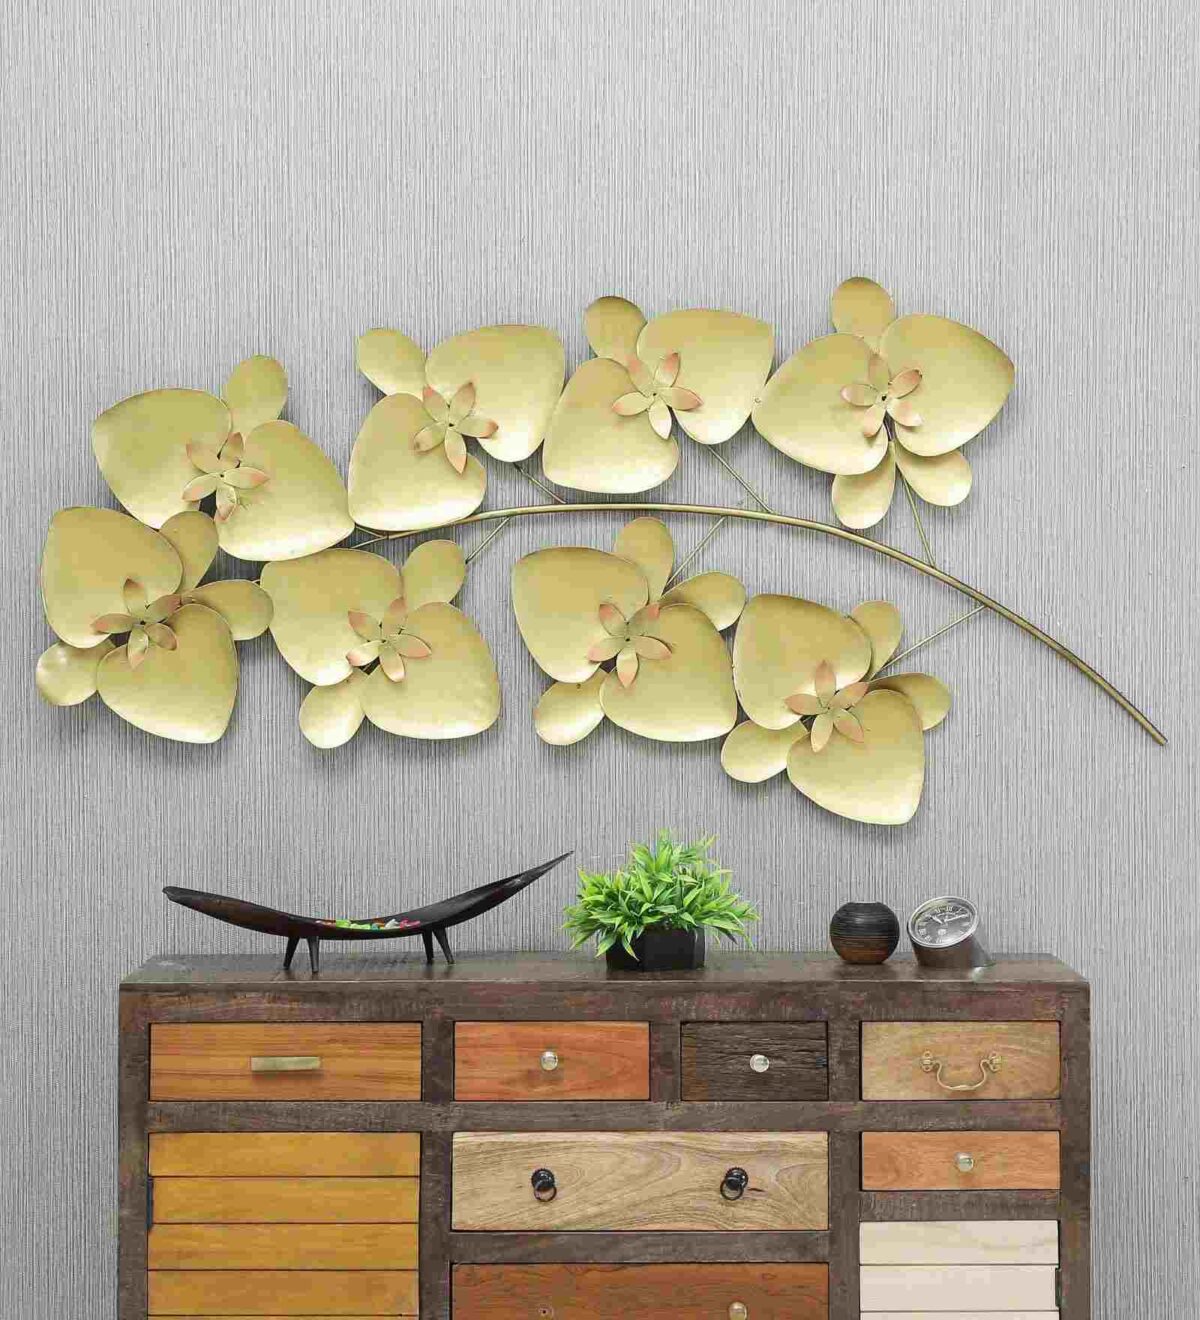 Buy this Leaf Decor online at Best Price